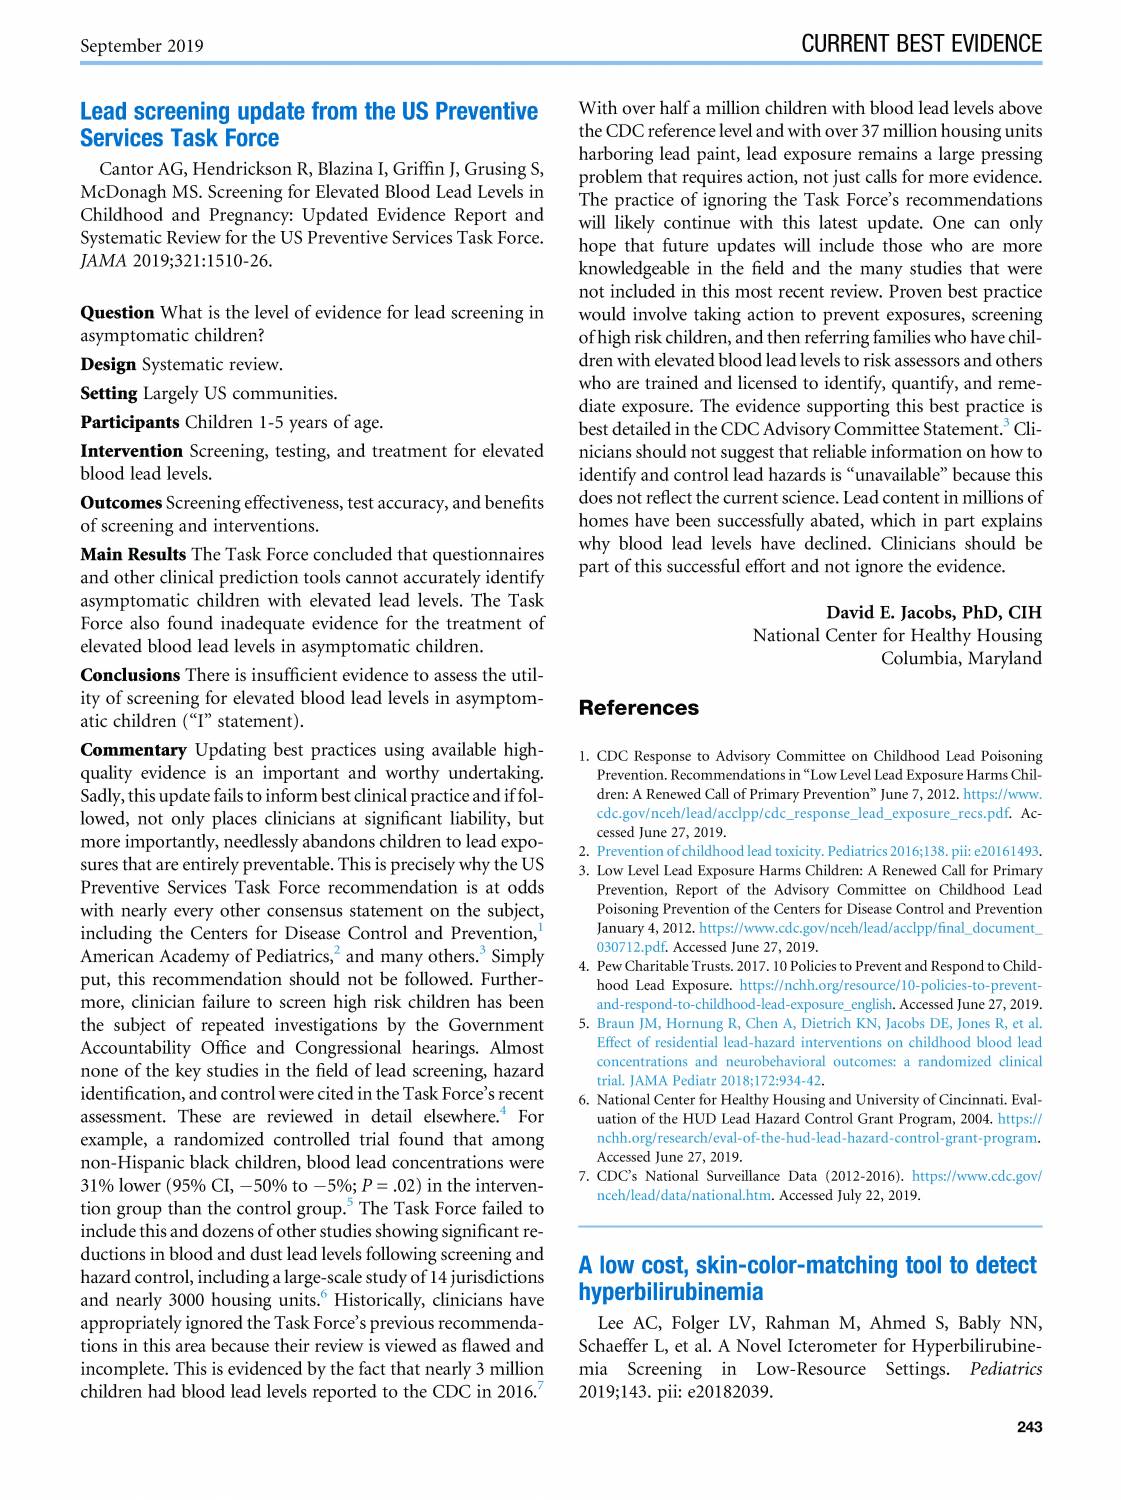 Article: Lead Screening Update from the US Preventive Services Task Force